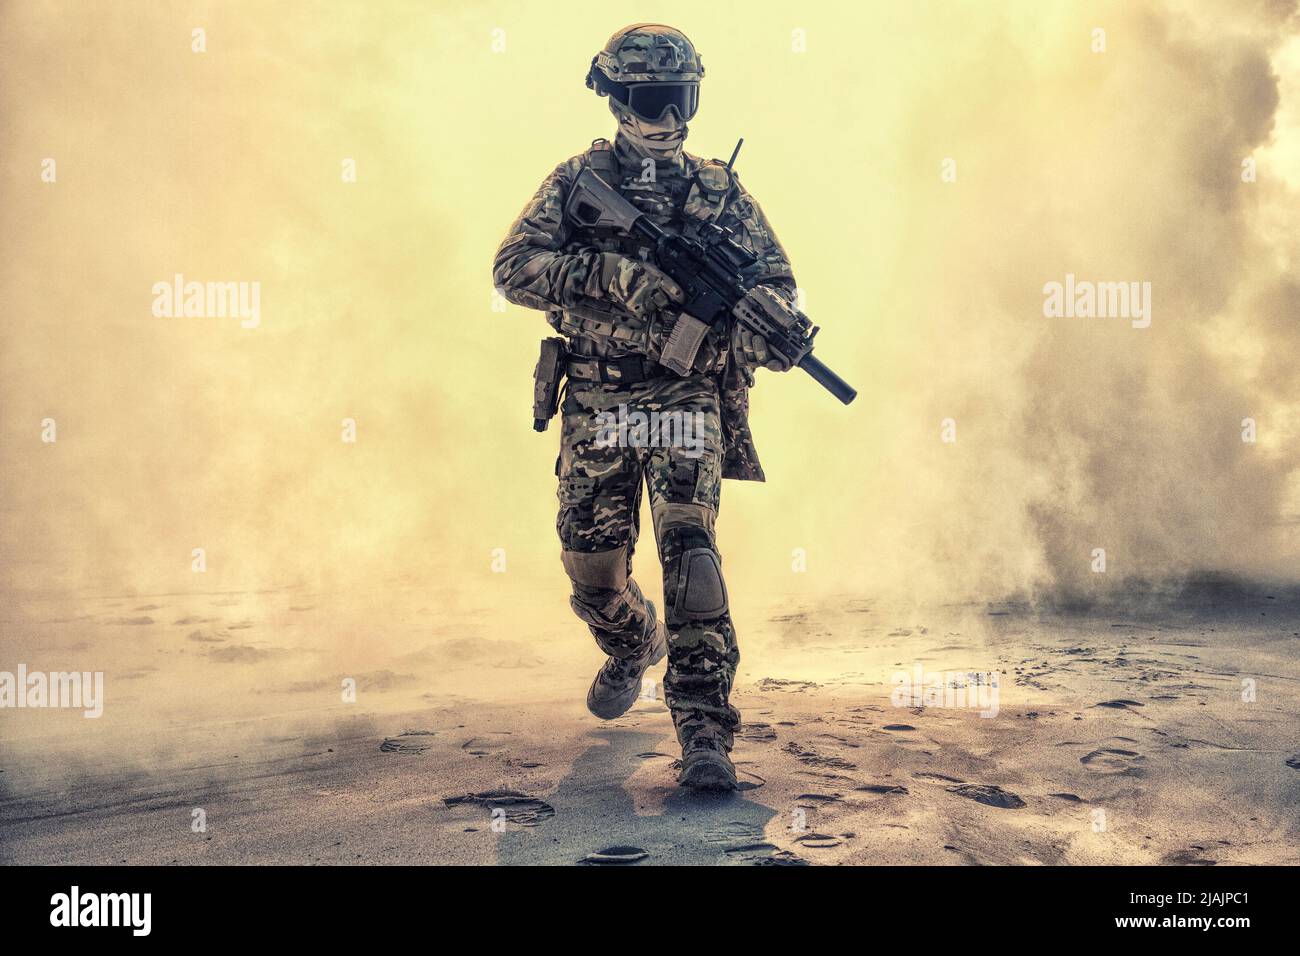 Army soldier breaking through battlefield covered in flames. Stock Photo